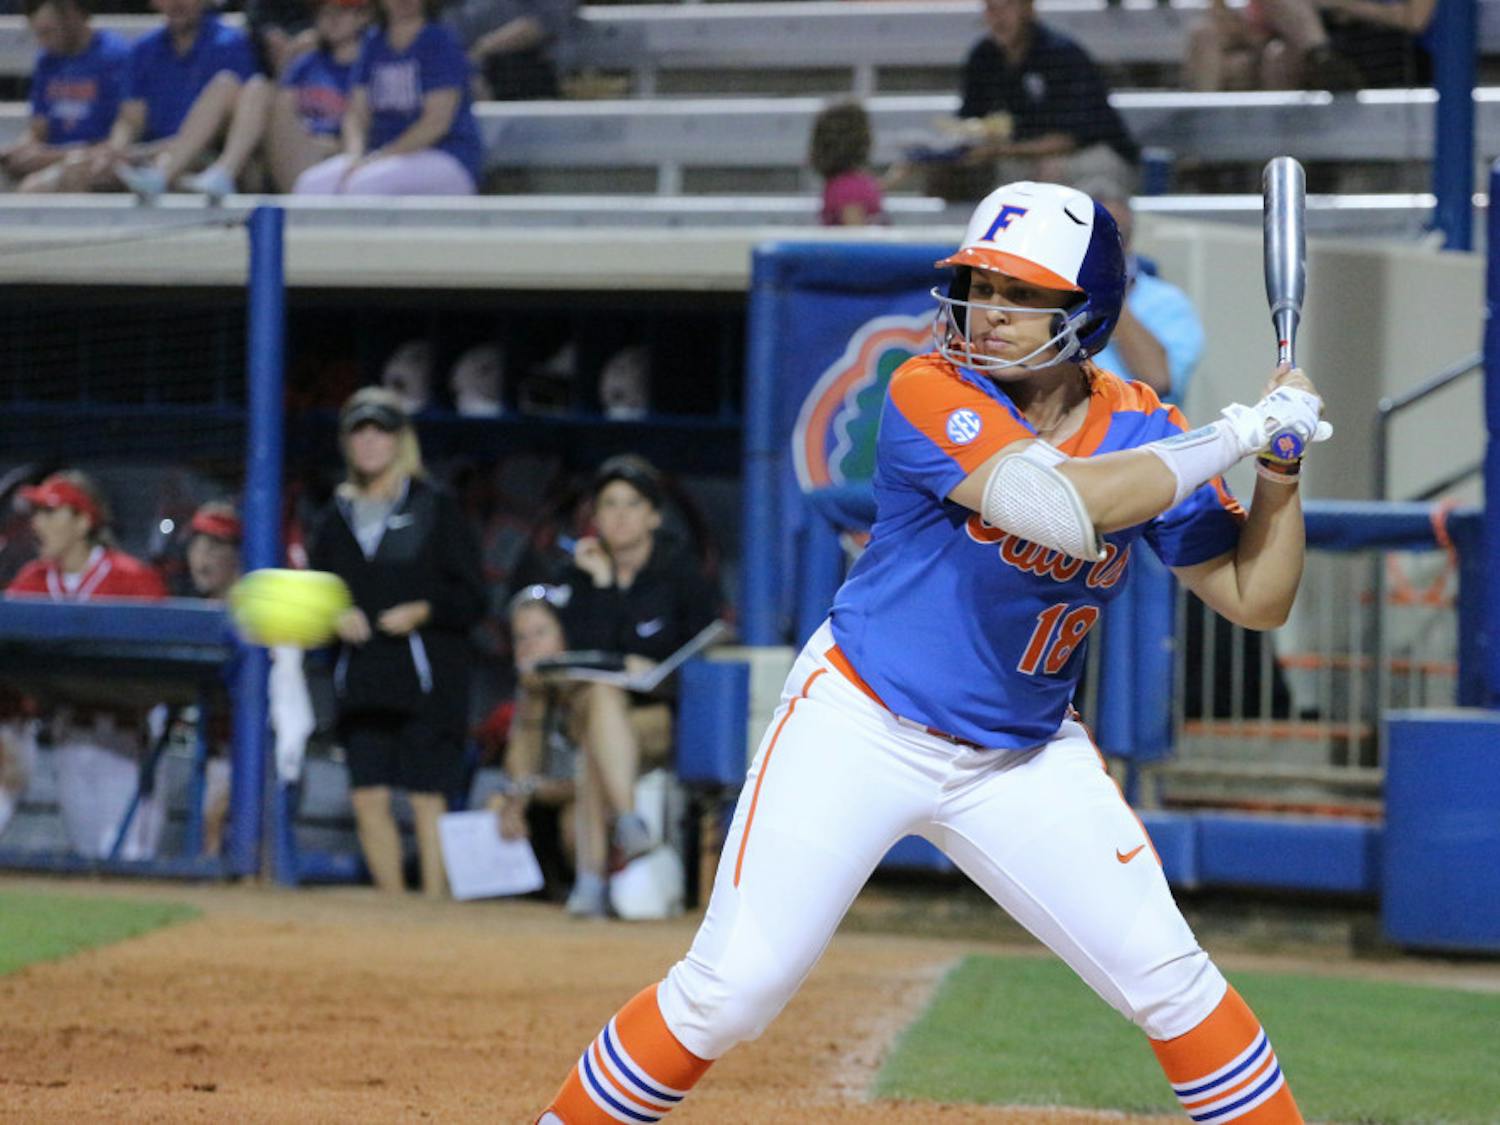 Amanda Lorenz scorched another home run on Thursday against Alabama.